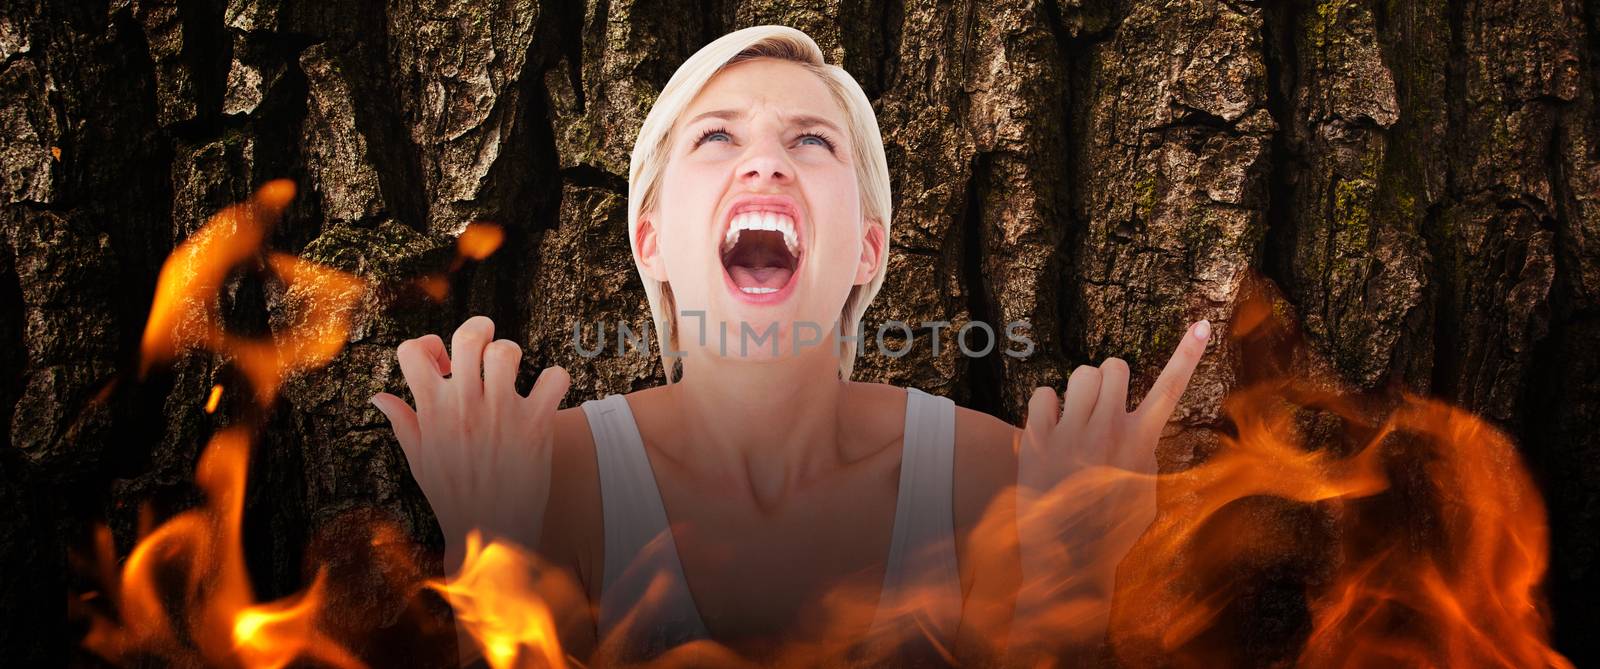 Composite image of upset woman screaming with hands up  by Wavebreakmedia